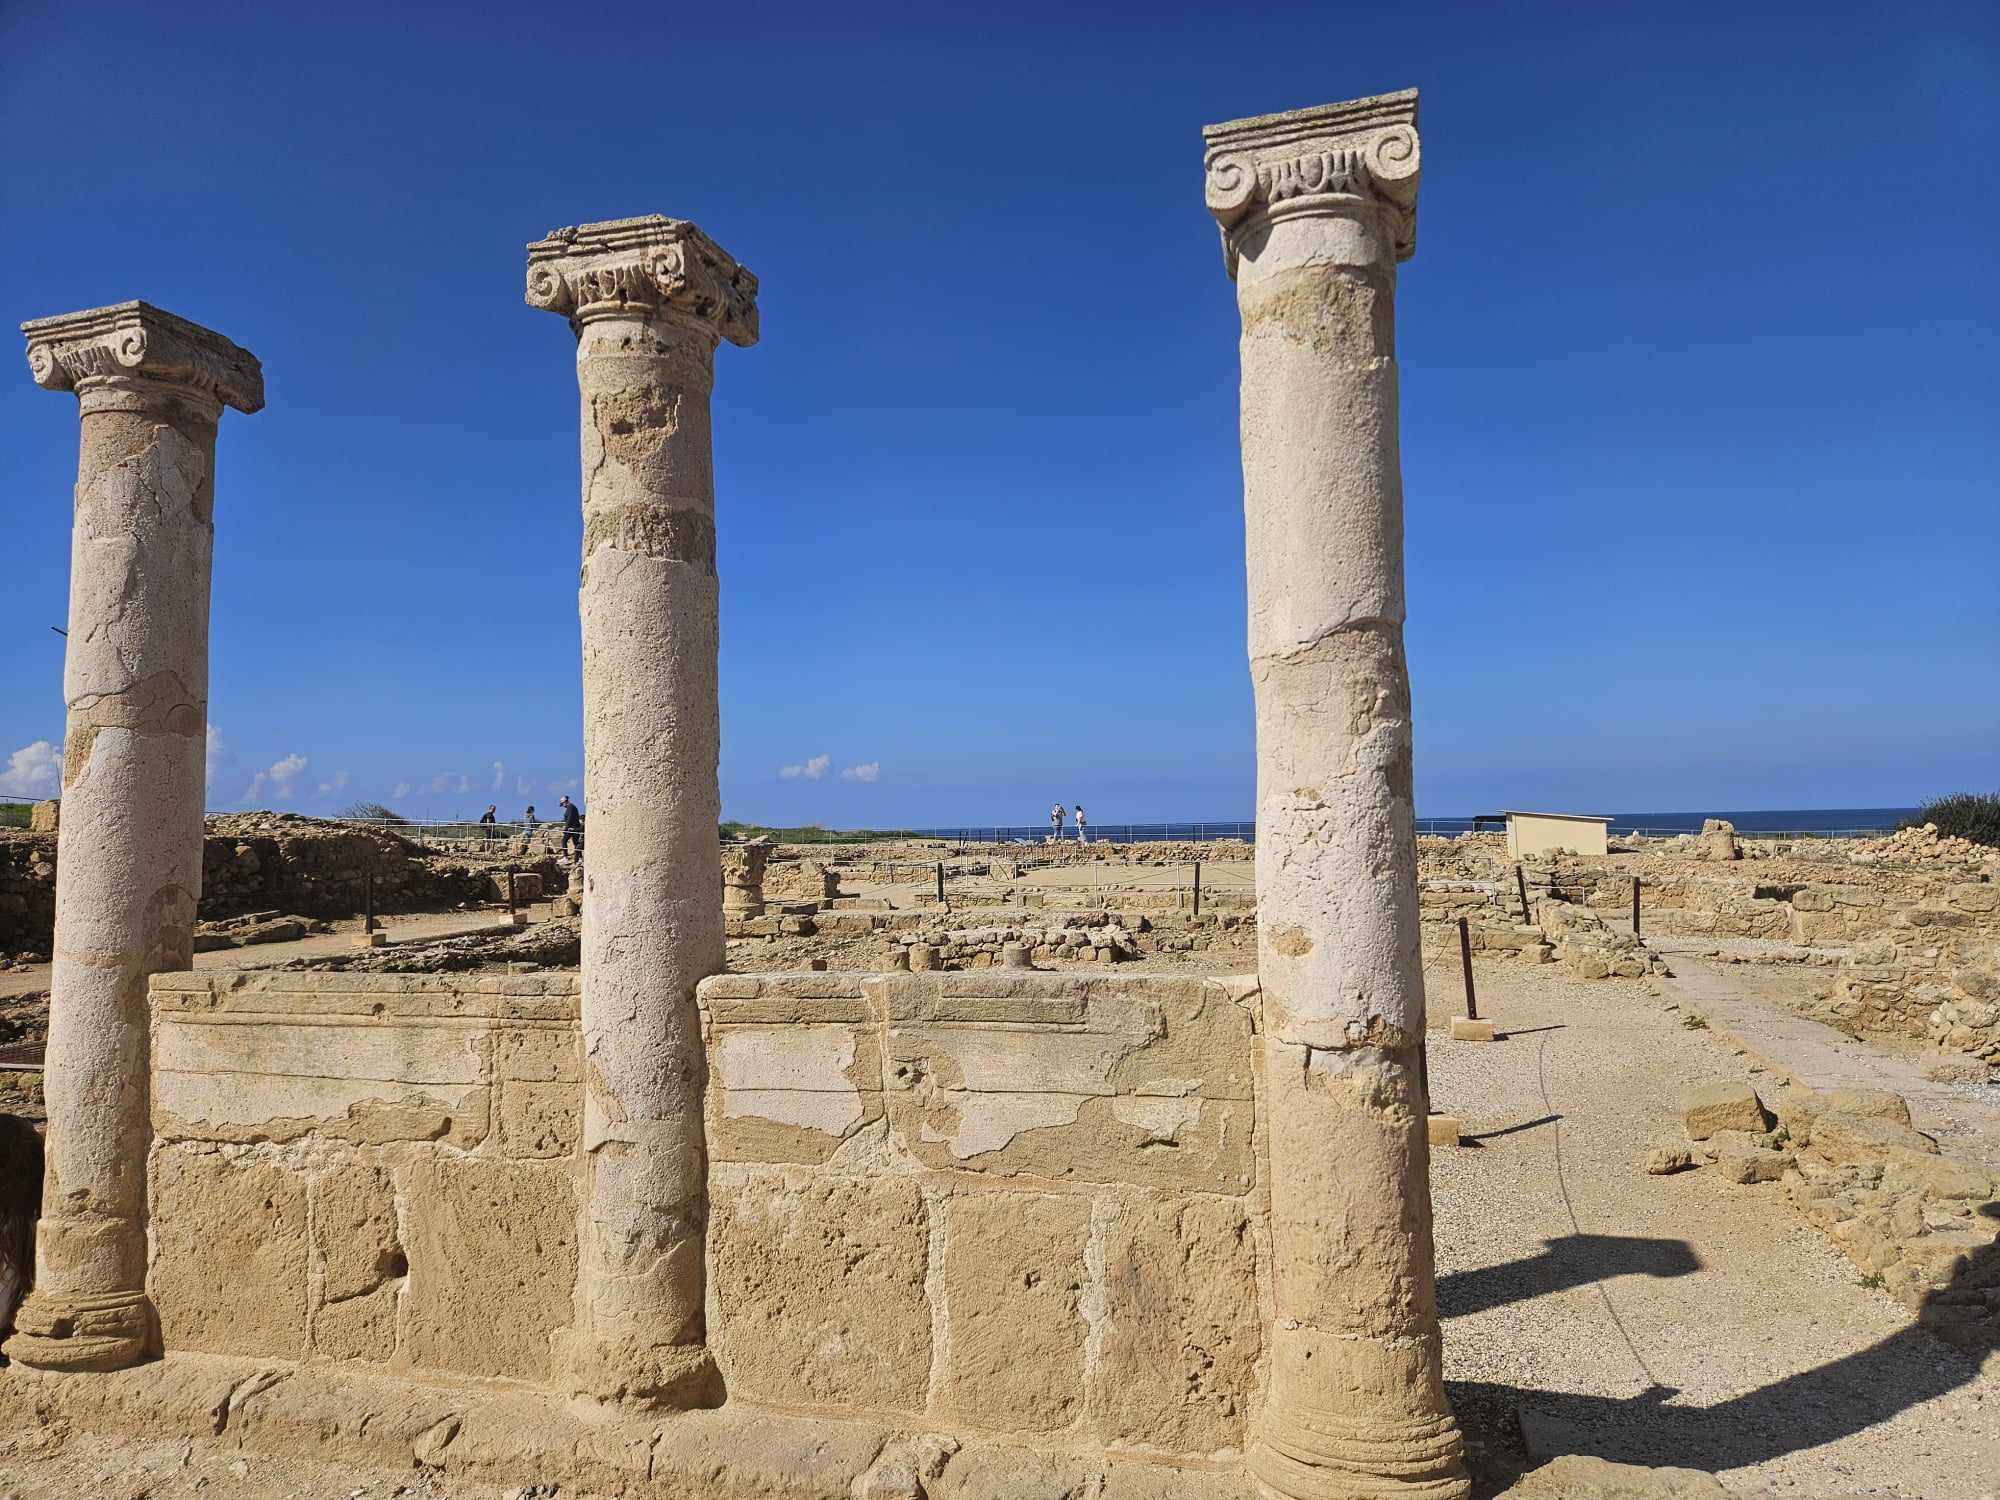 The archaeological site of Nea Paphos, near modern-day Paphos in Cyprus. Photo: Lucy Morgan